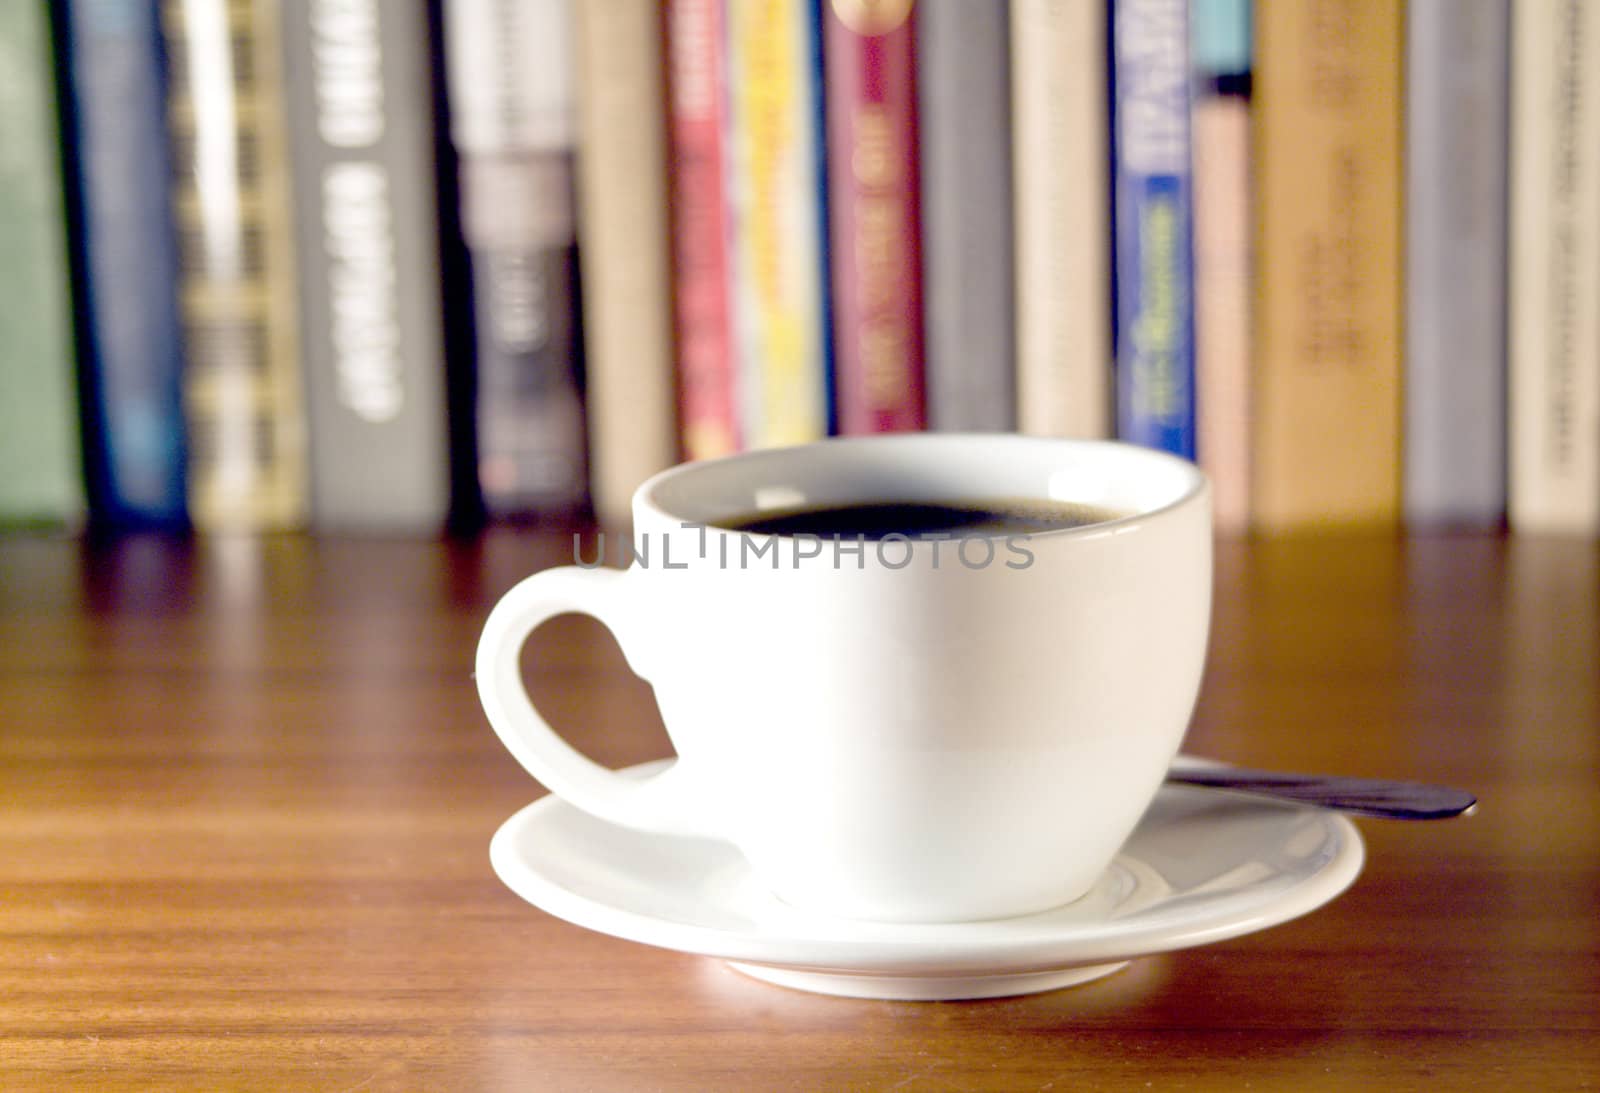 Coffee and books on a wooden table. Small depth of sharpness.